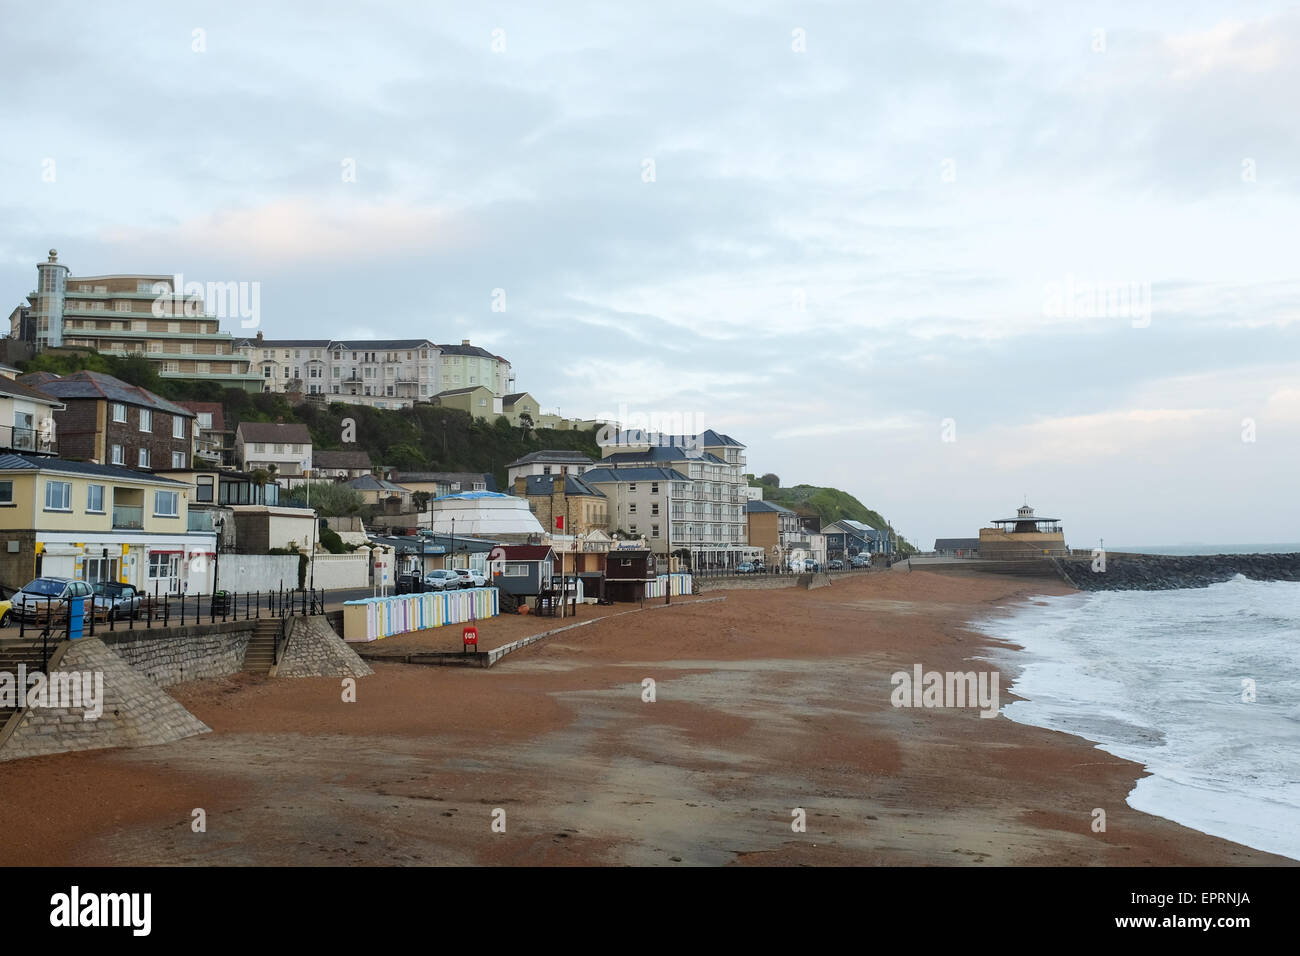 Ventnor seafront on the Isle of Wight, England. Stock Photo